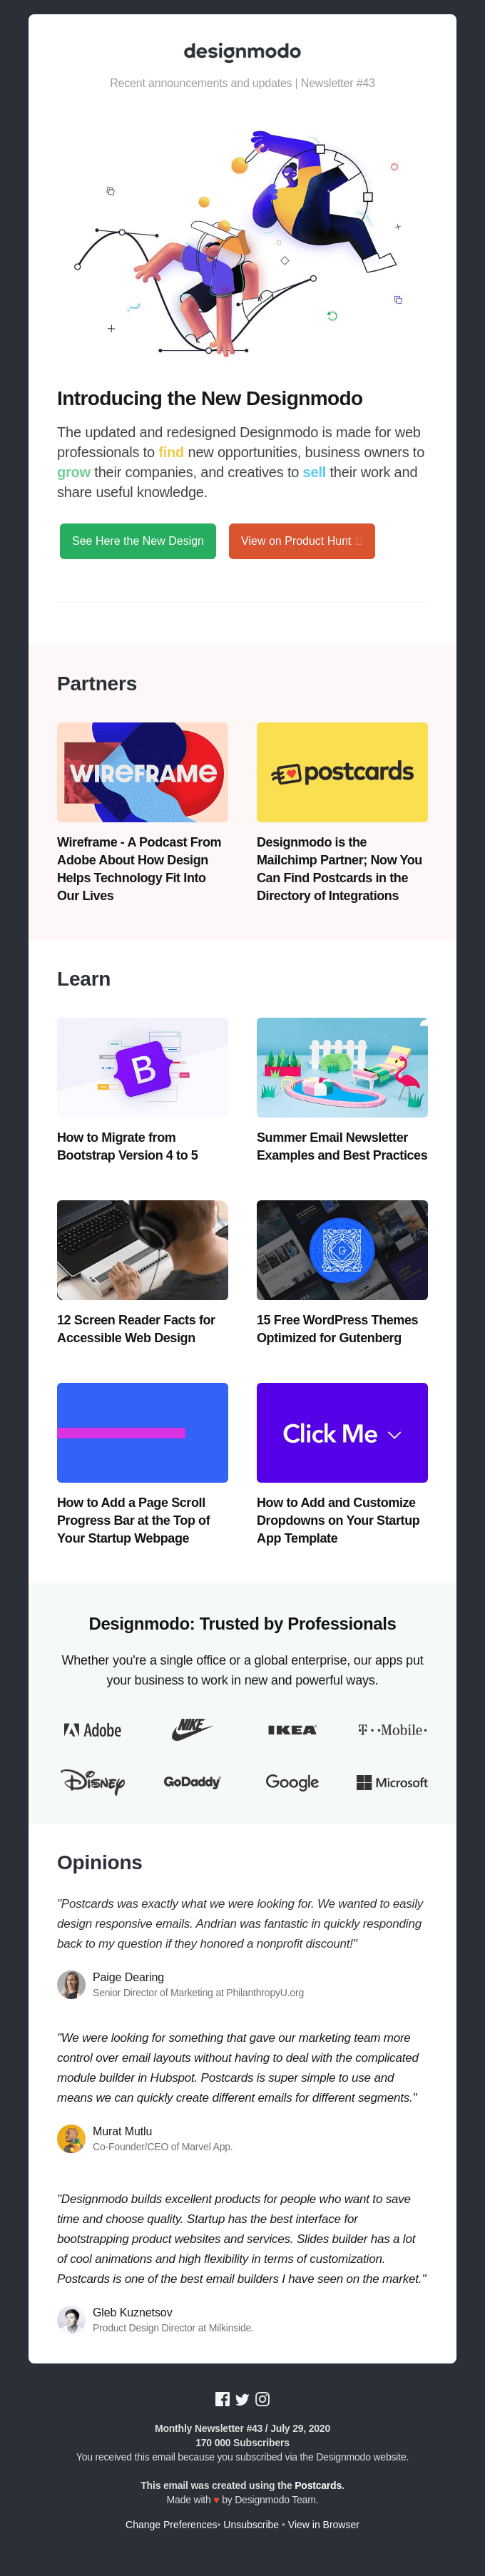 Introducing the New Designmodo, Adobe Podcast, Mailchimp Partners, Summer Emails, Bootstrap 5 - Designmodo Email Newsletter